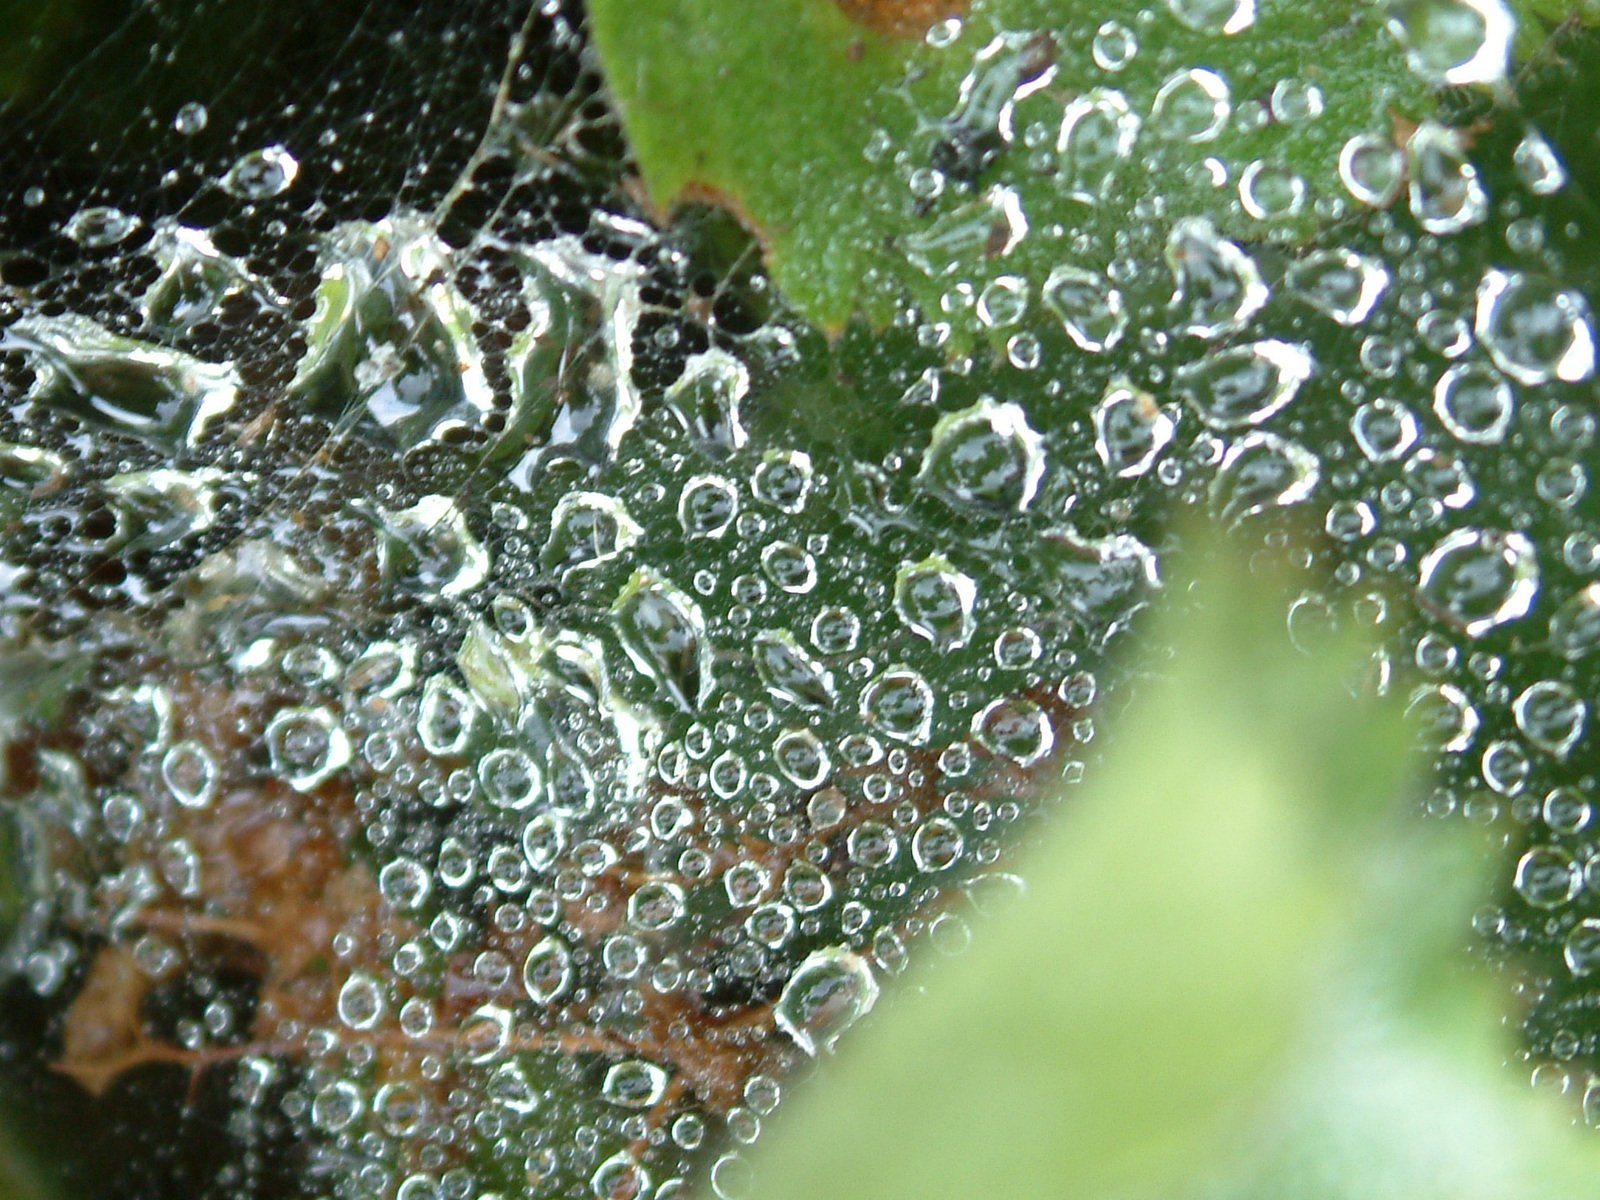 water droplets hanging down on a leaf